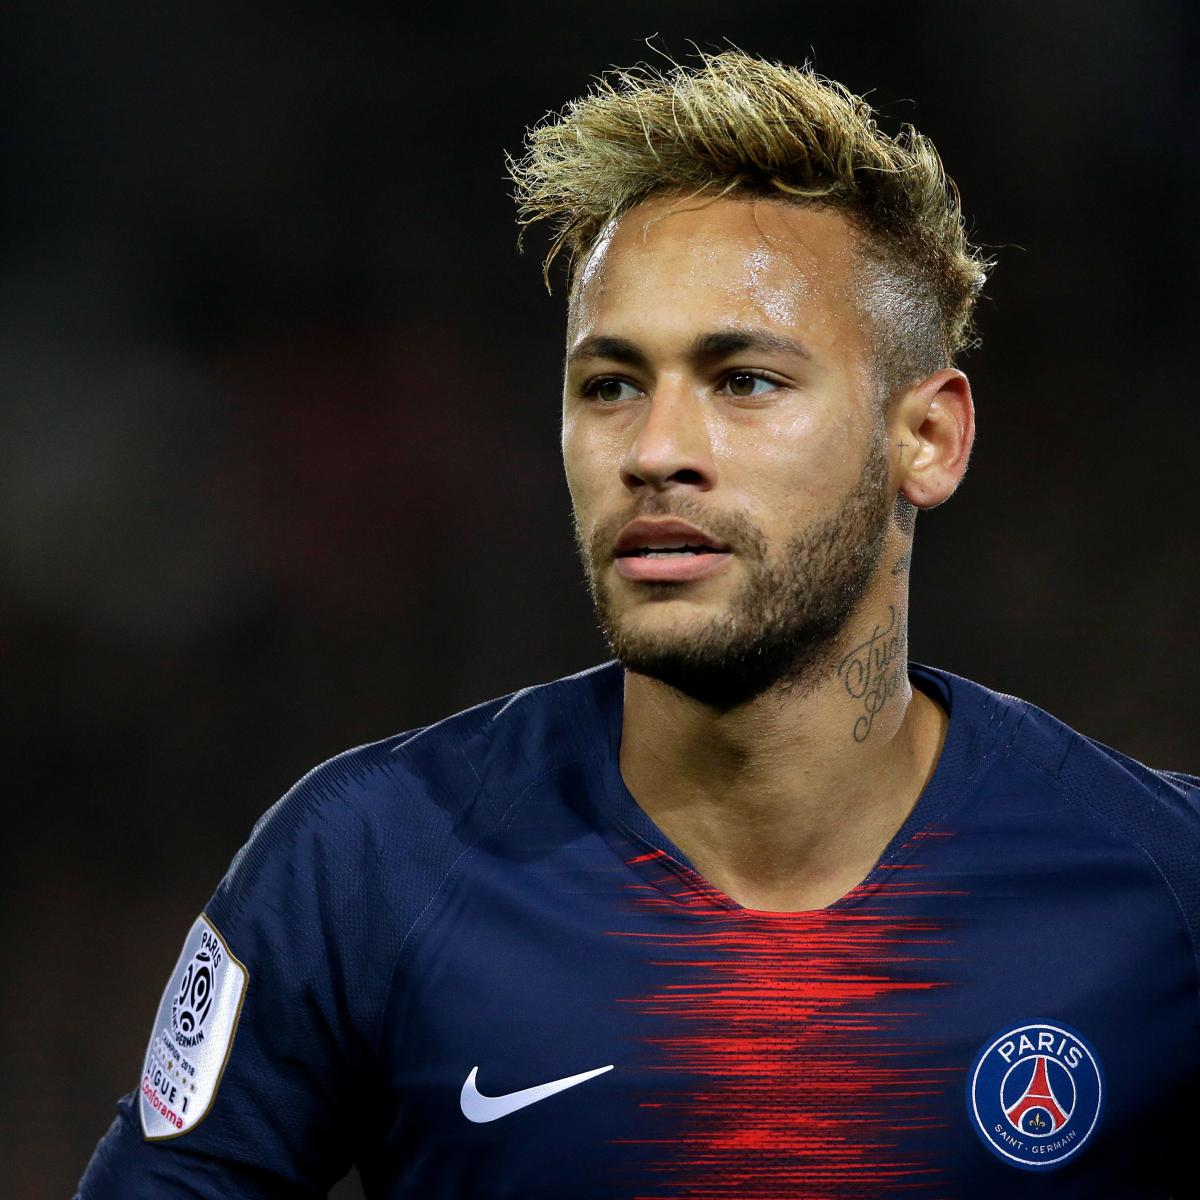 Neymar Can Reportedly Leave PSG for €220M Next Summer Amid ...